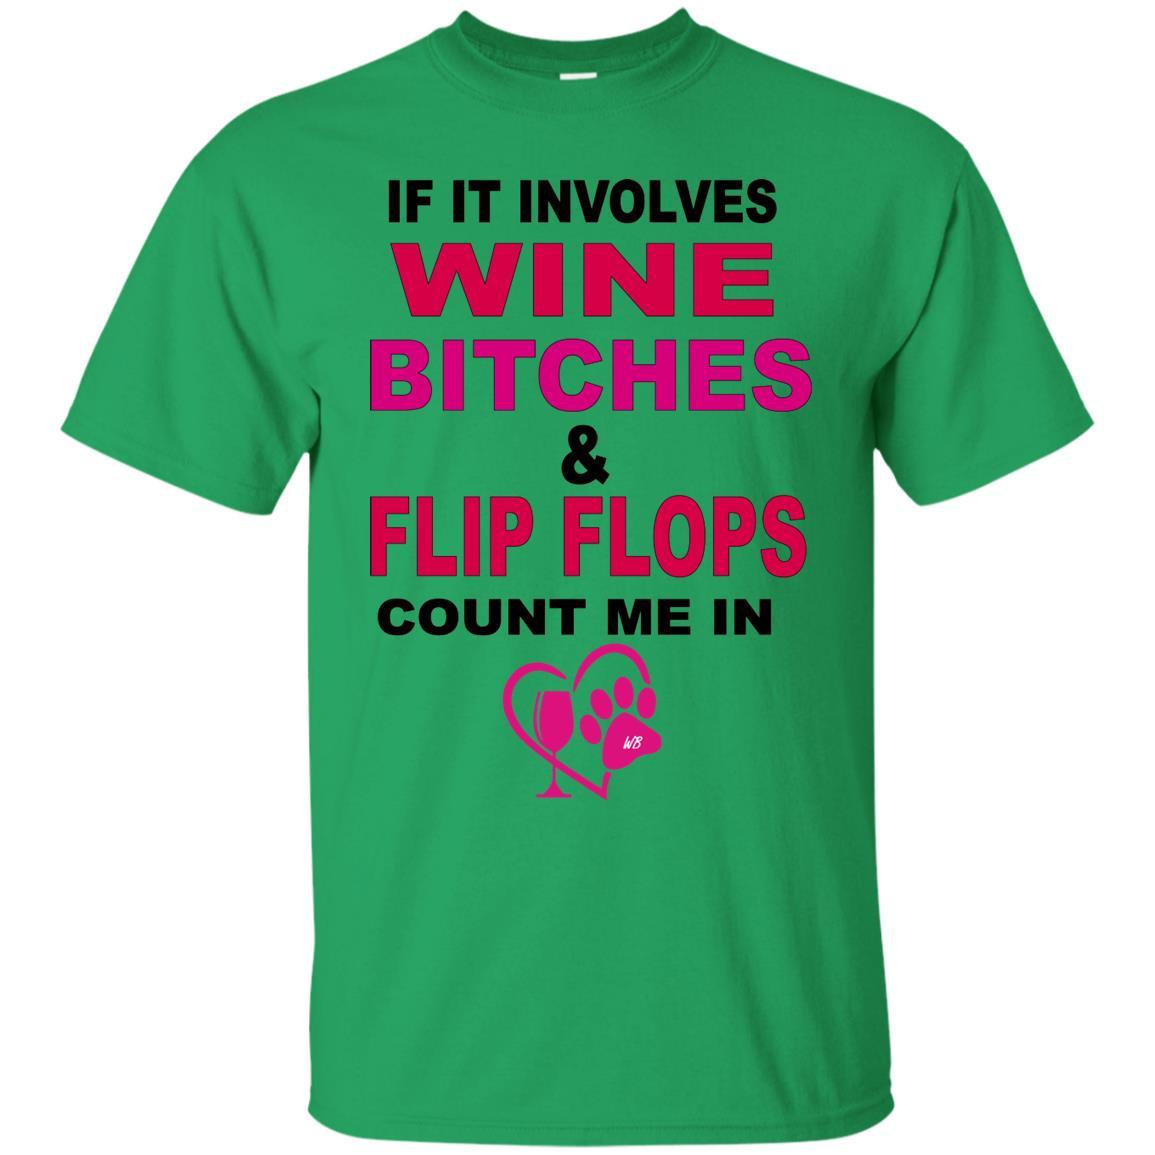 T-Shirts Irish Green / S WineyBitches.co " If It Involves Wine Bitches & Flip Flops I'm In" Ultra Cotton Unisex T-Shirt WineyBitches.co Hilariously Funny T-Shirt for Wine & Dog Lovers   WineyBitchesCo